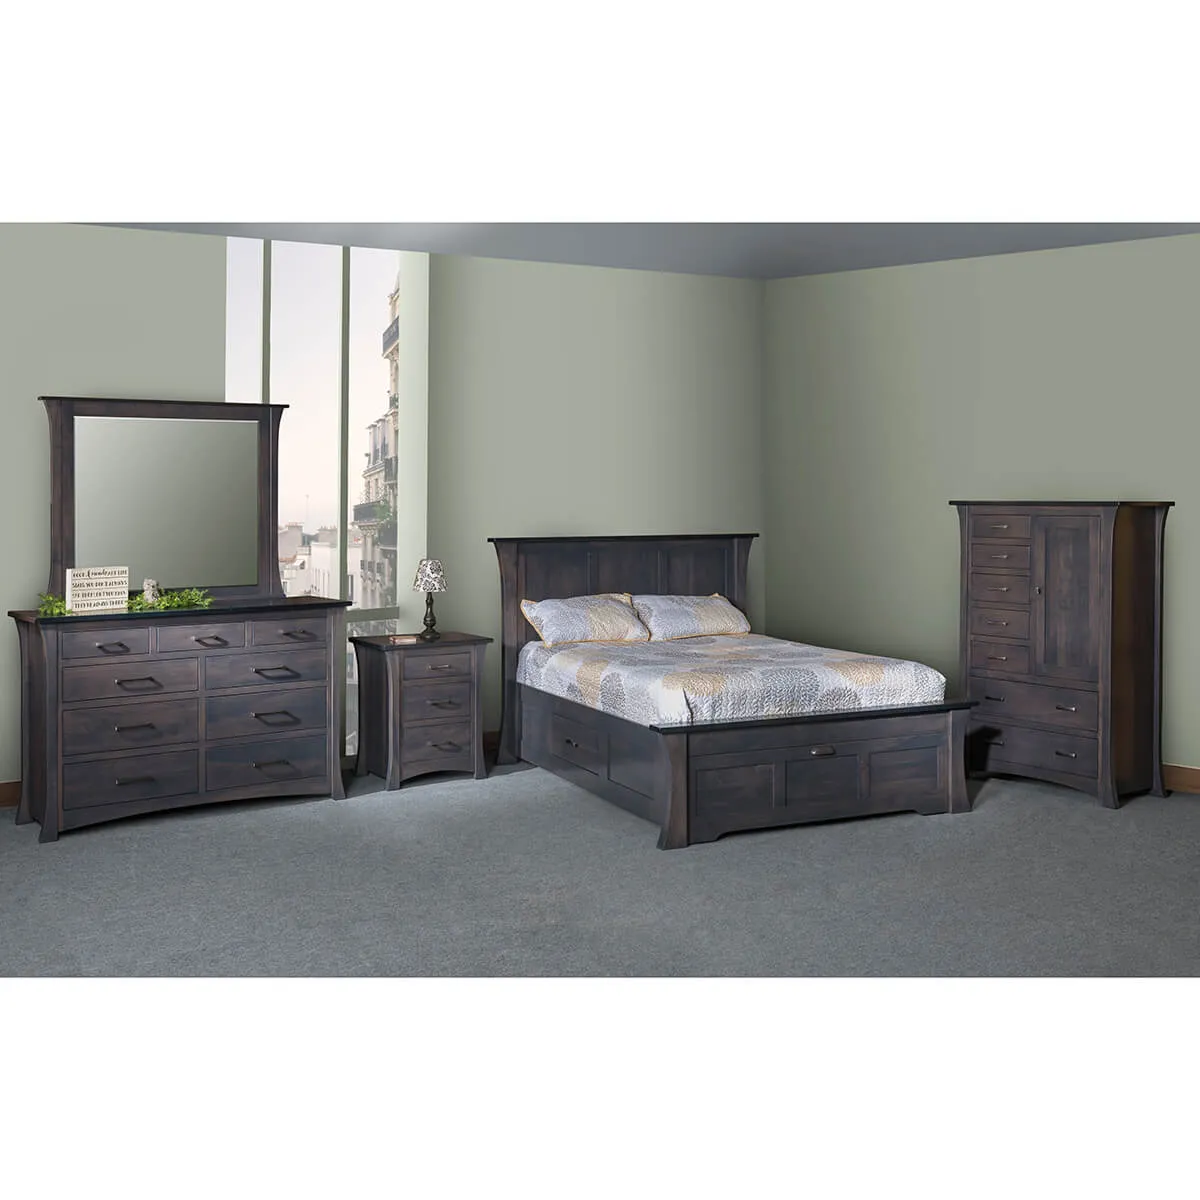 Armadale Bedroom Collection